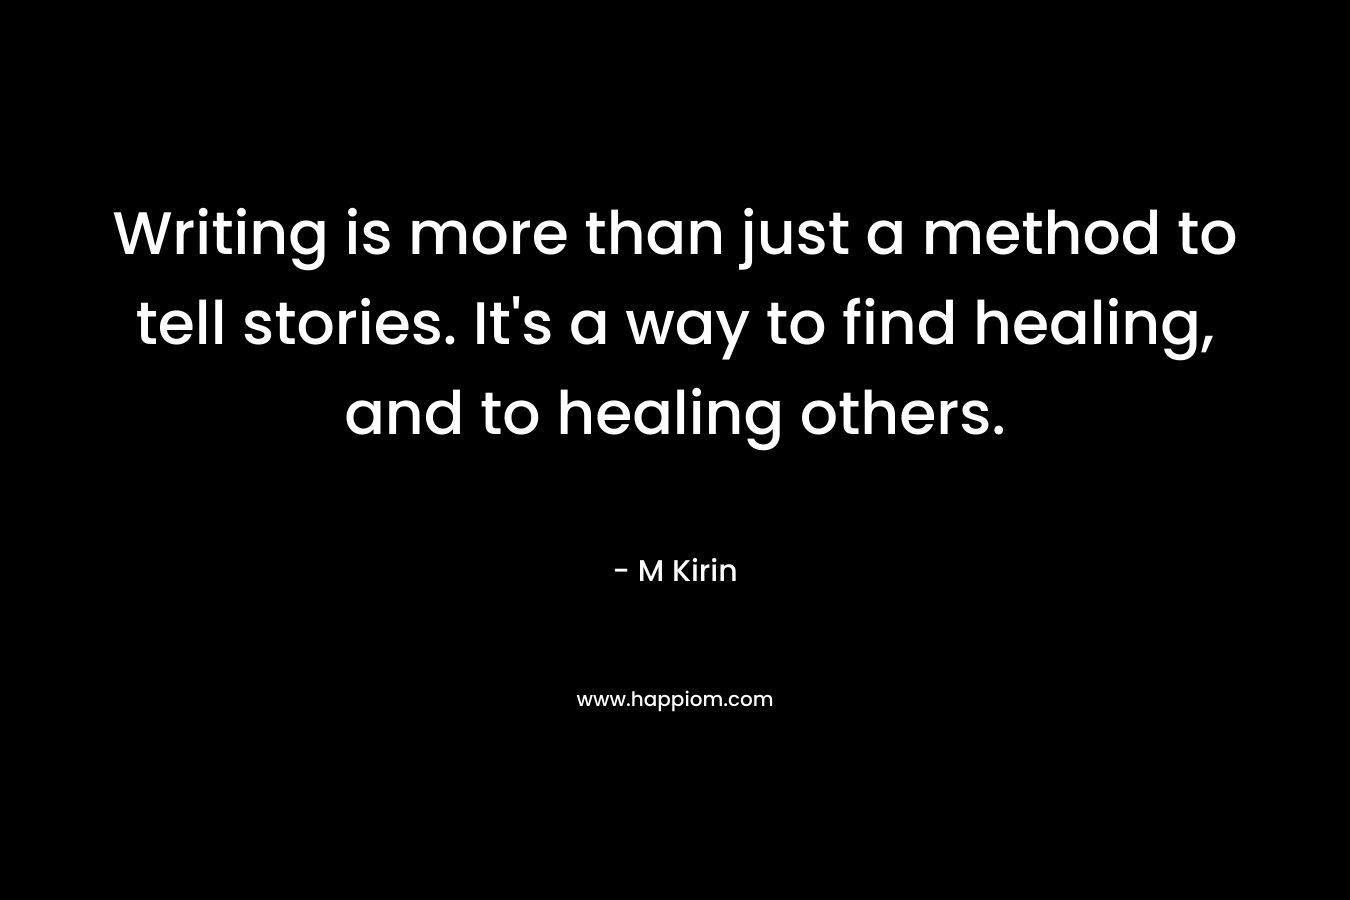 Writing is more than just a method to tell stories. It’s a way to find healing, and to healing others. – M Kirin